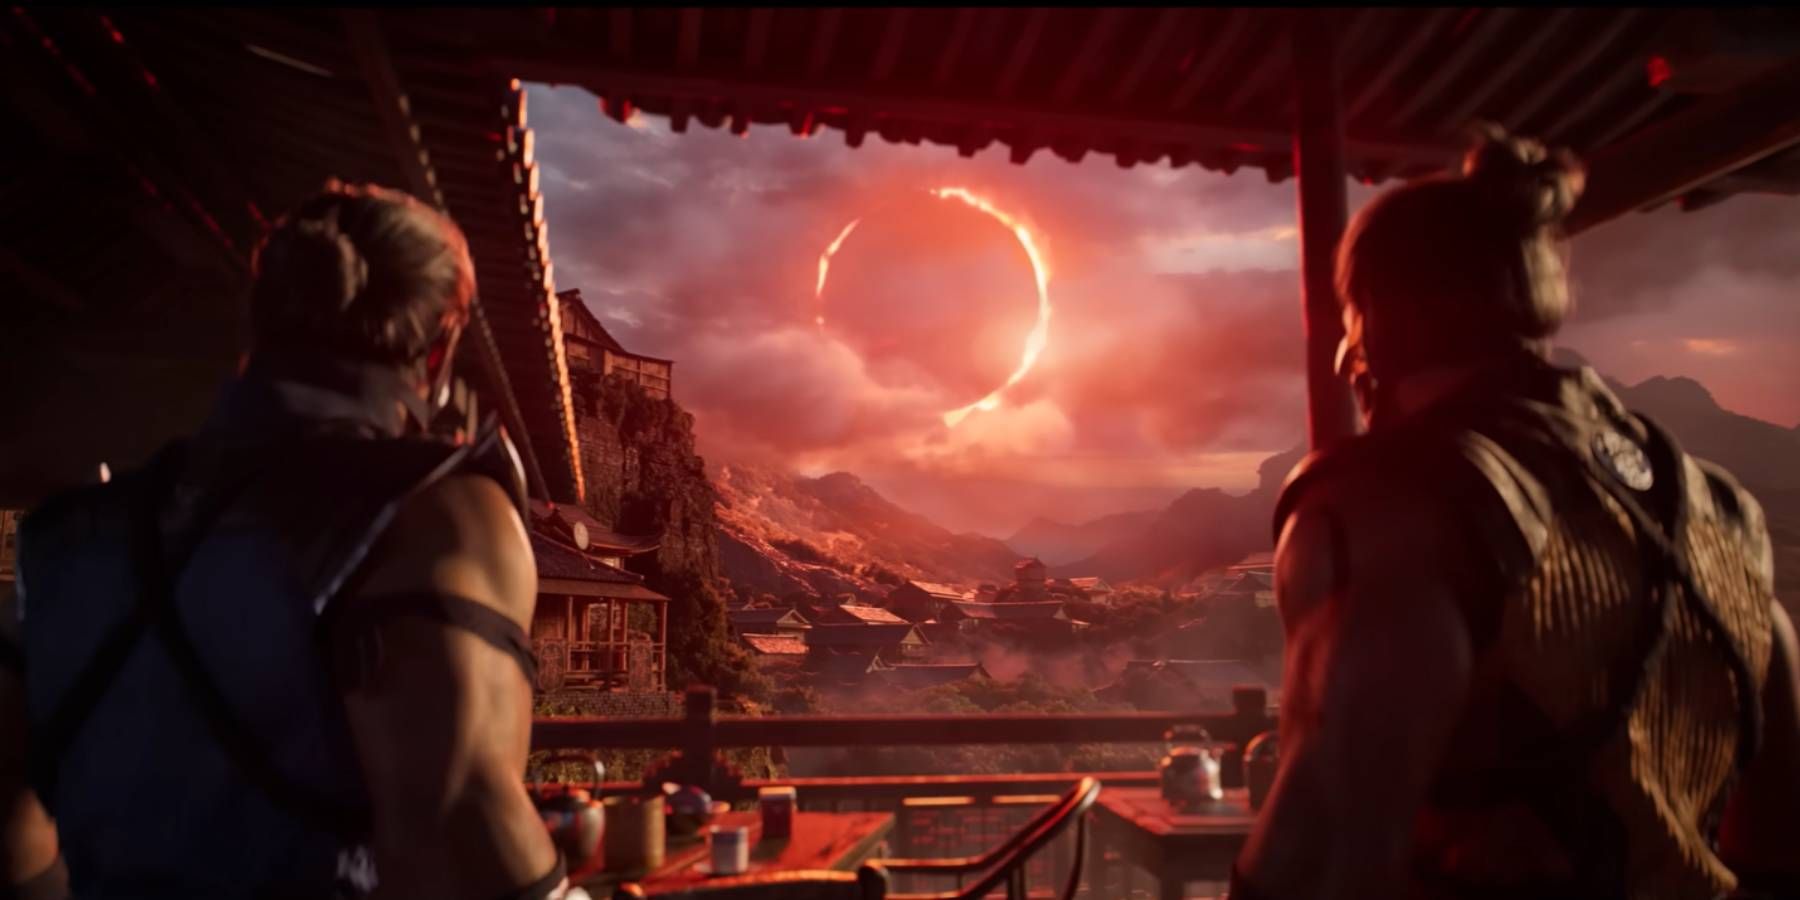 Sub-Zero and Scorpion looking at an eclipse in the Mortal Kombat 1 trailer